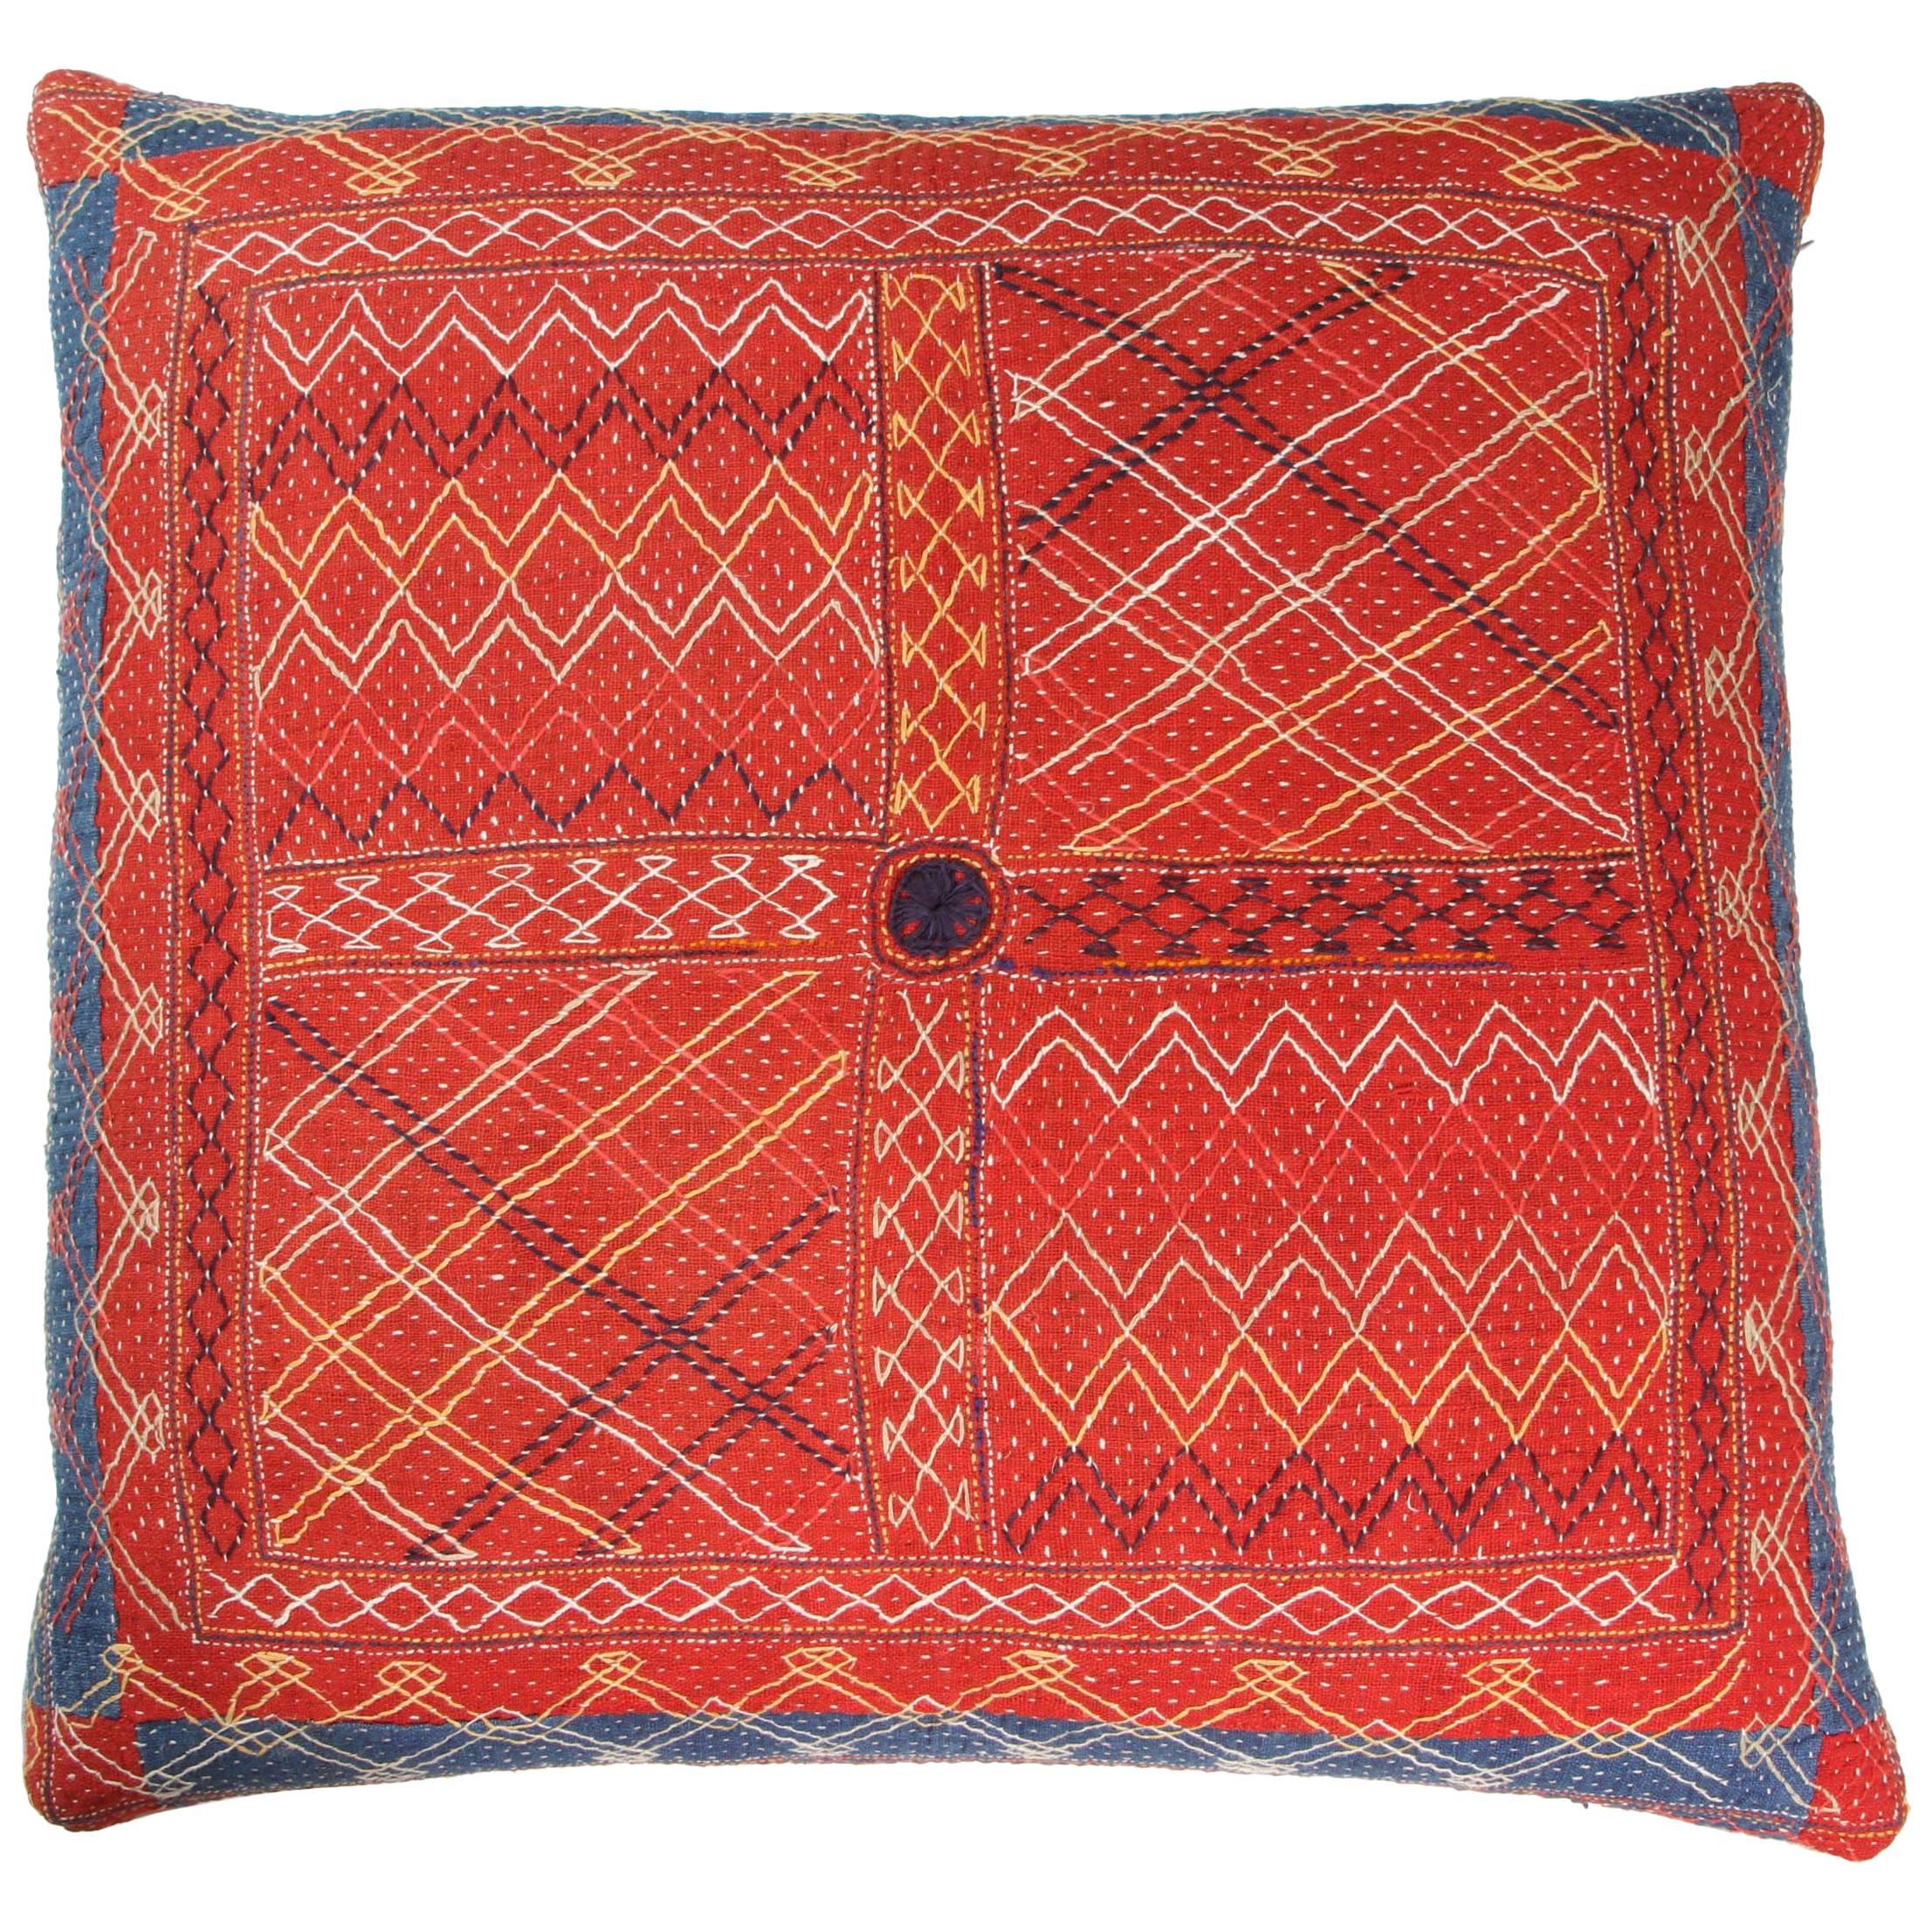 Indian Banjara Cotton Bag Face Pillow in Red, Blue, Yellow, White and Black For Sale